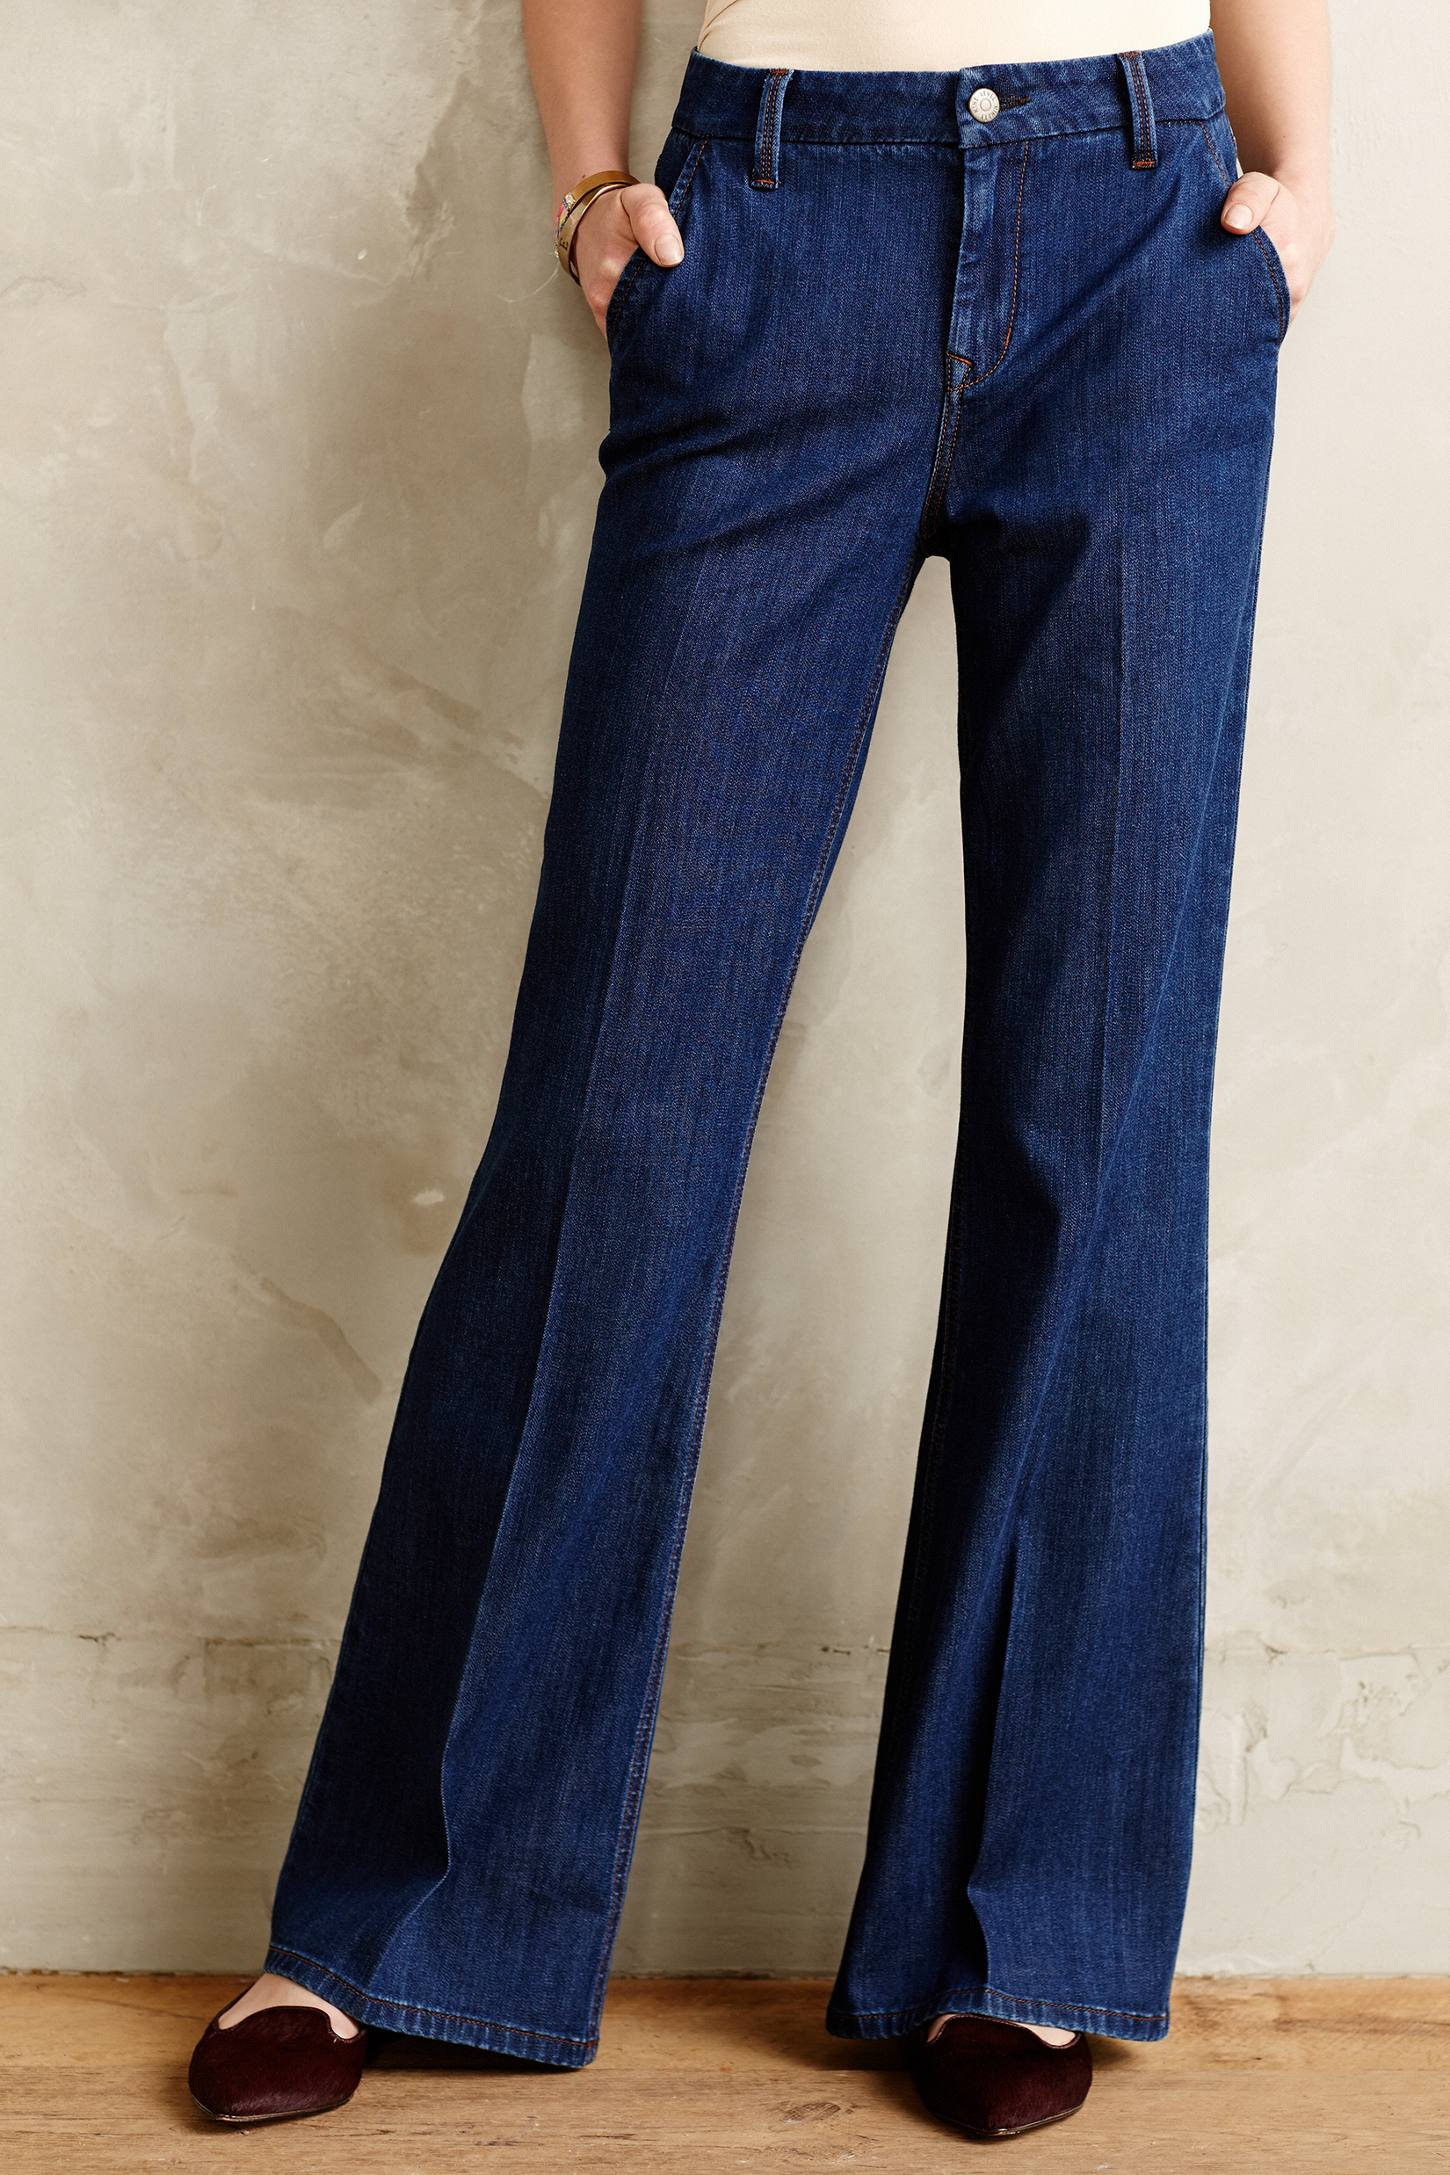 Lyst - Level 99 Tanya High-Rise Trousers in Blue